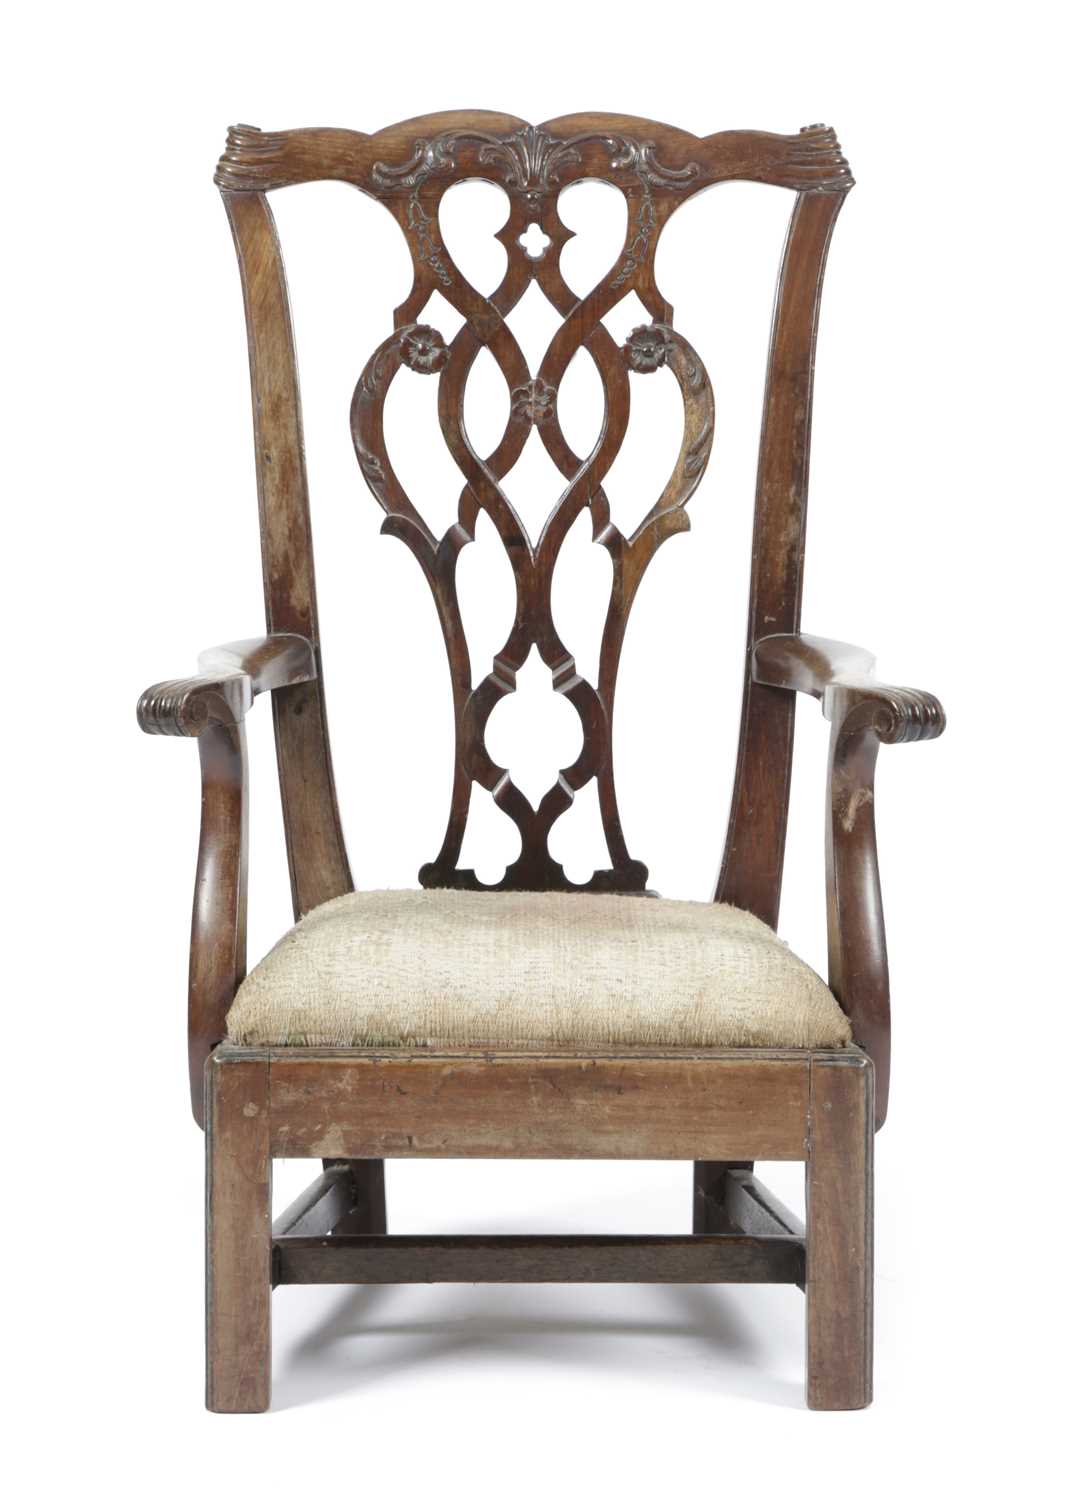 A GEORGE III SCOTTISH MAHOGANY CHILD'S ARMCHAIR BY CHARLES DOUGLAS OF YESTER, C.1770 the pierced and